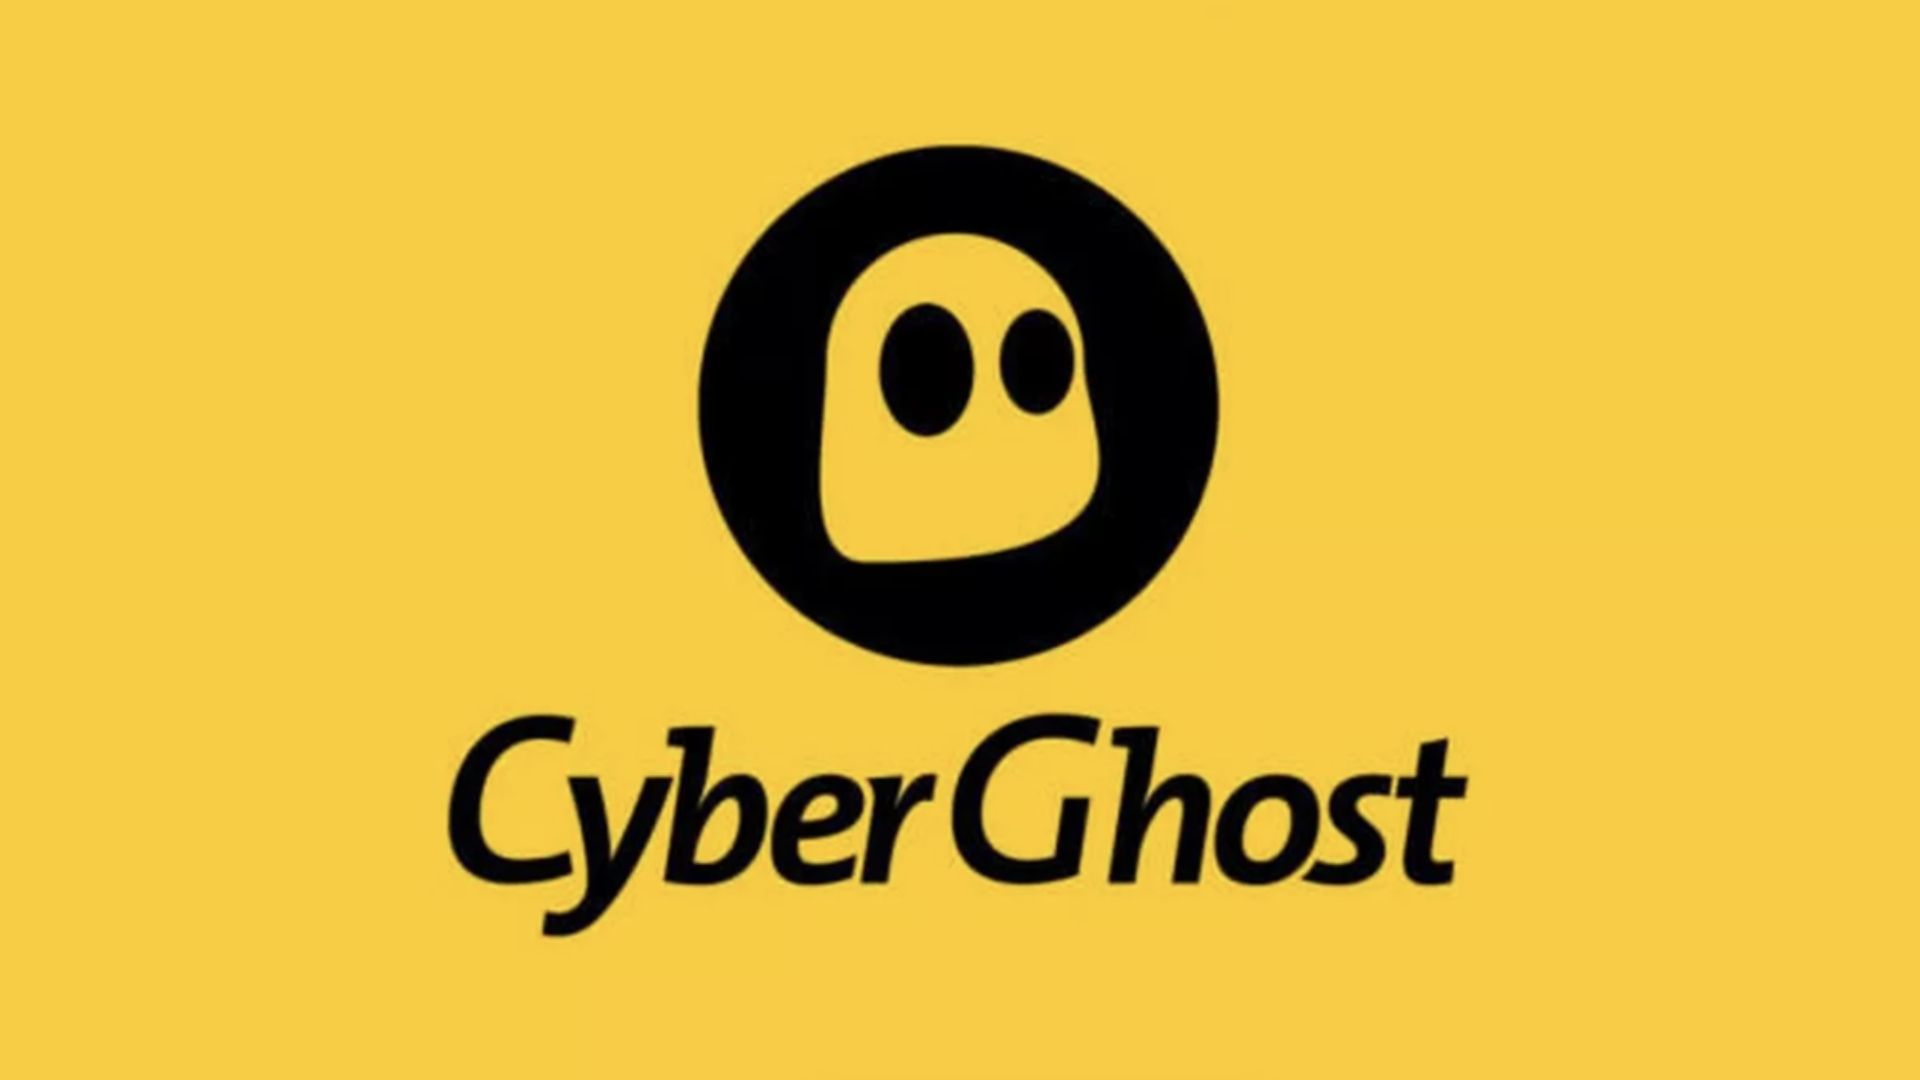 VPN deals: CyberGhost. Image shows the logo of CyberGhost.